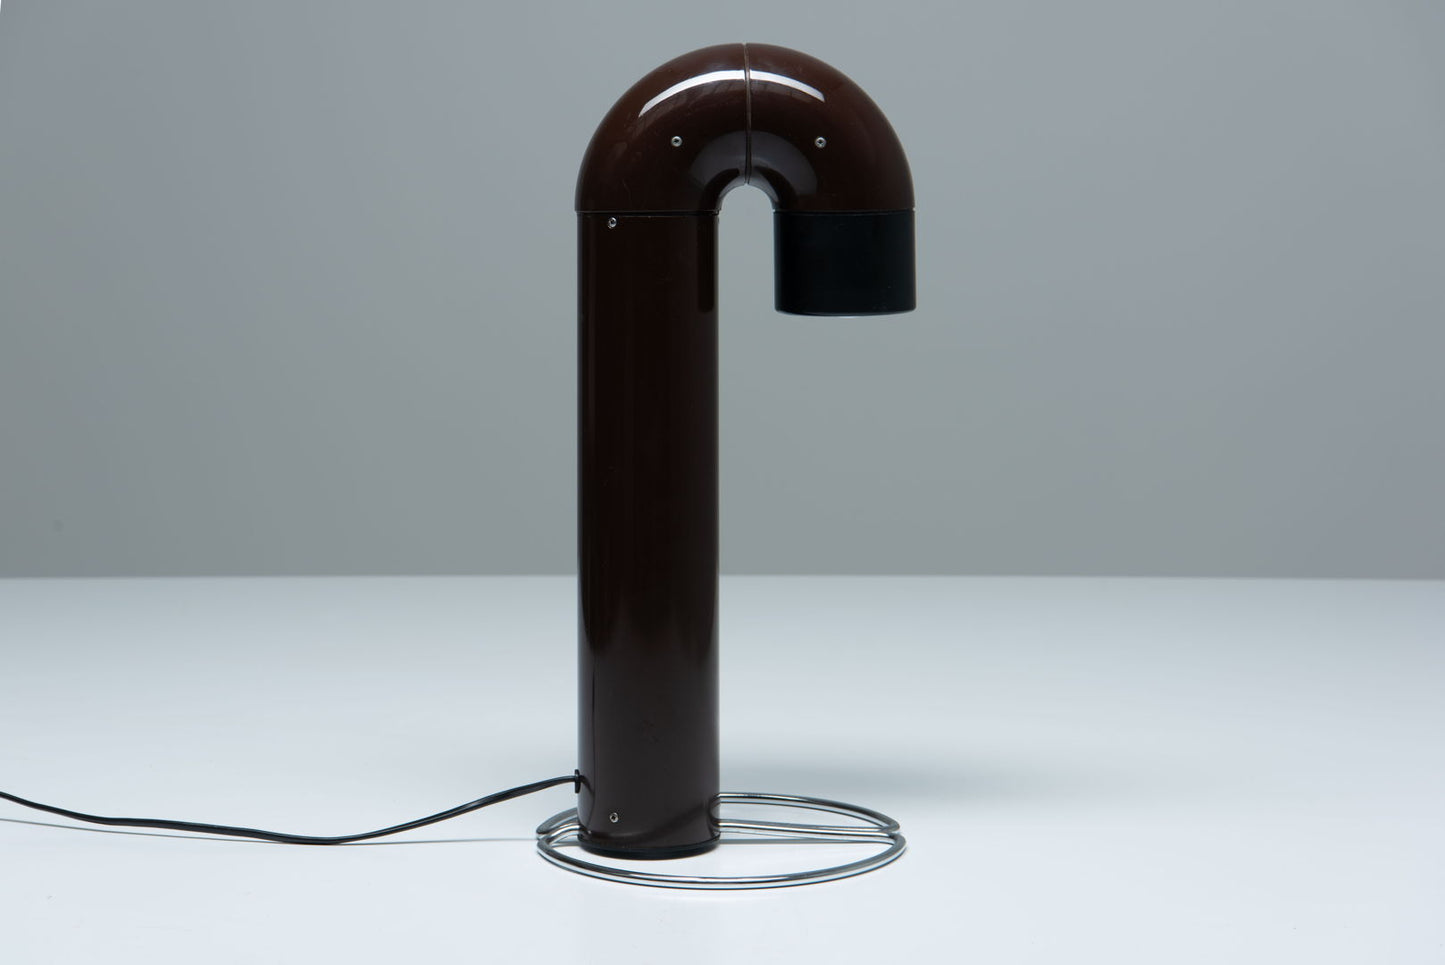 Flamingo Table Lamp designed by Kwok Hoi Chan